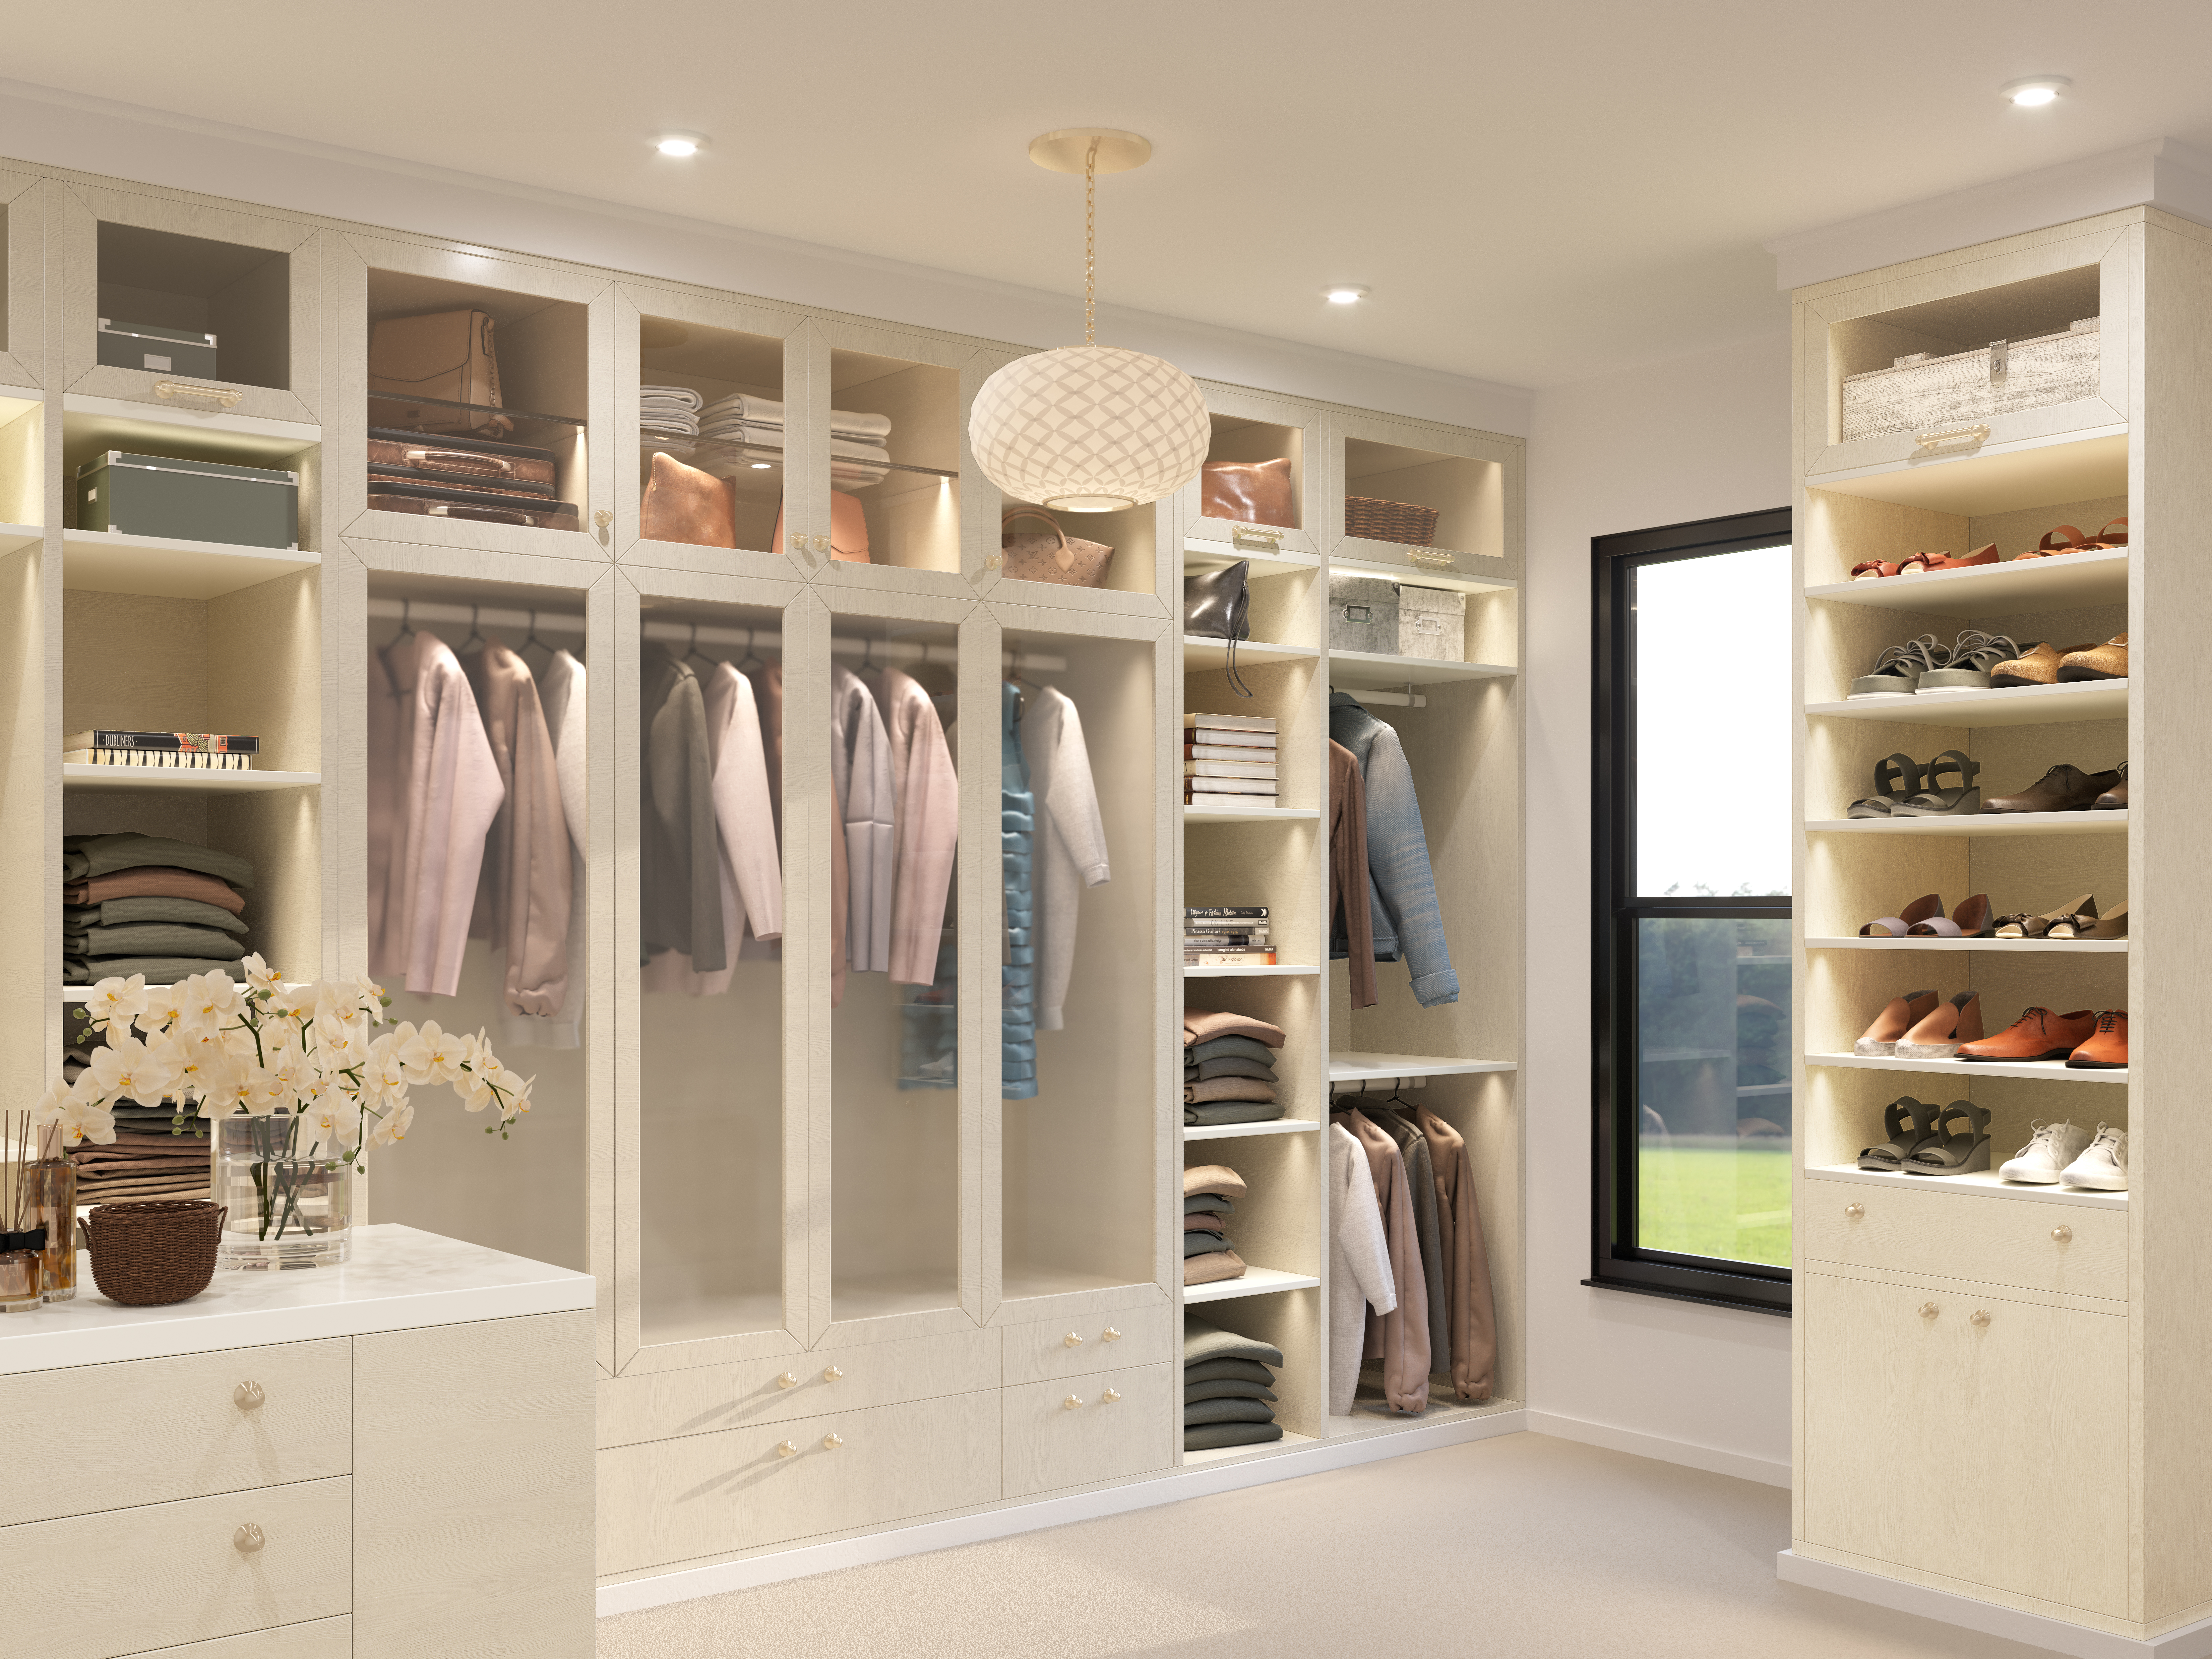 Estimate for Walk-In Closet by Thompson Millwork